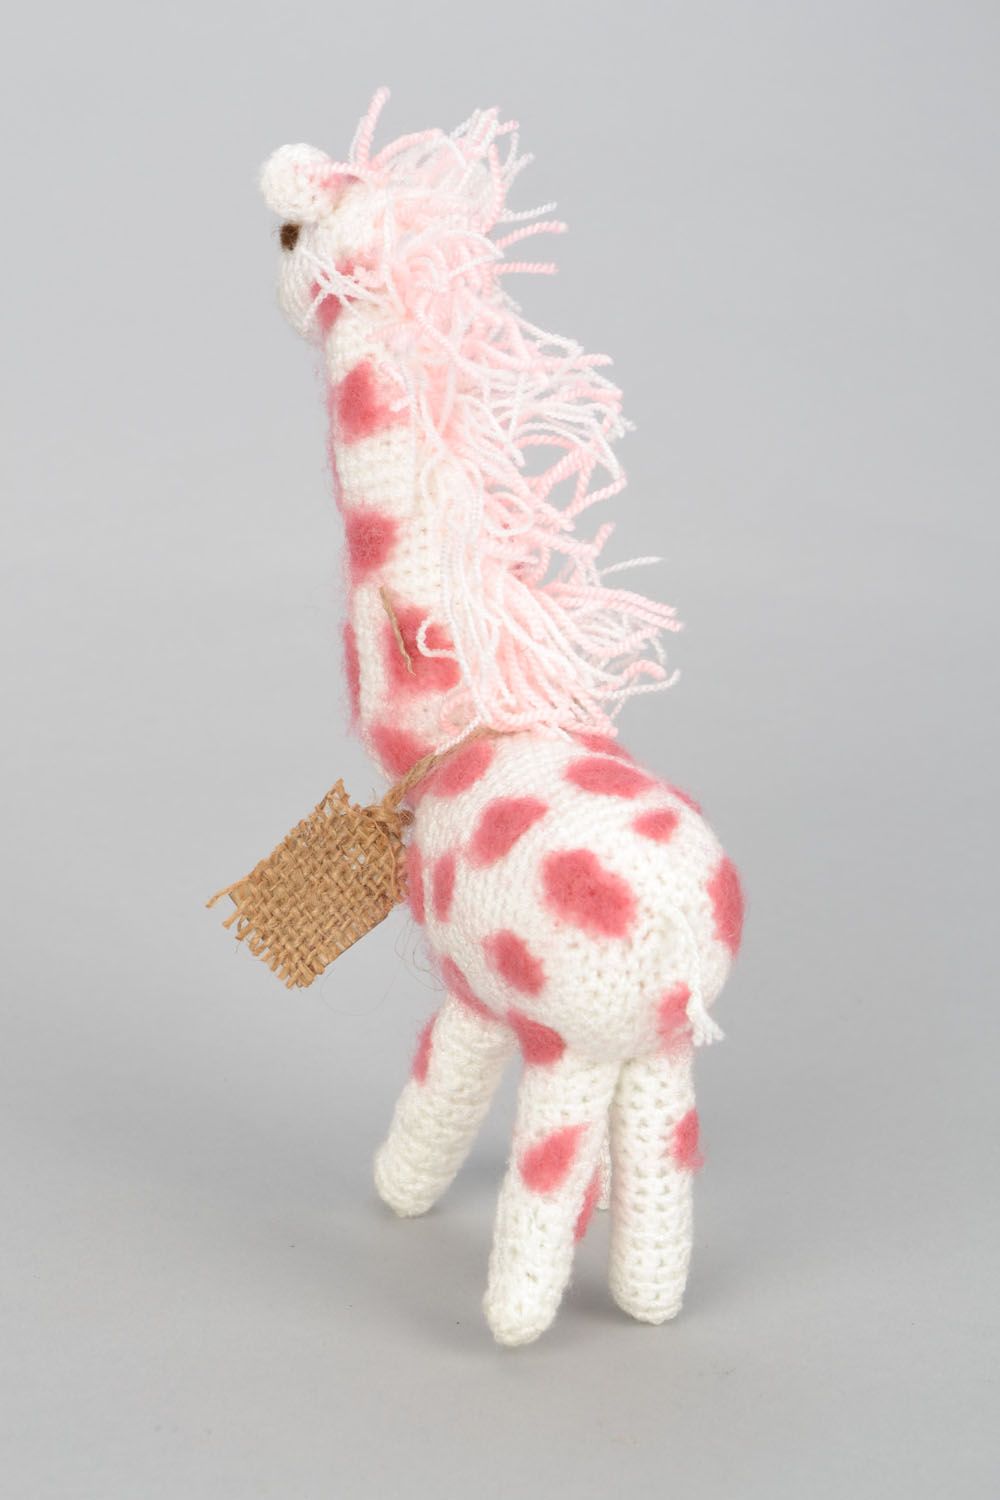 Crocheted toy photo 5